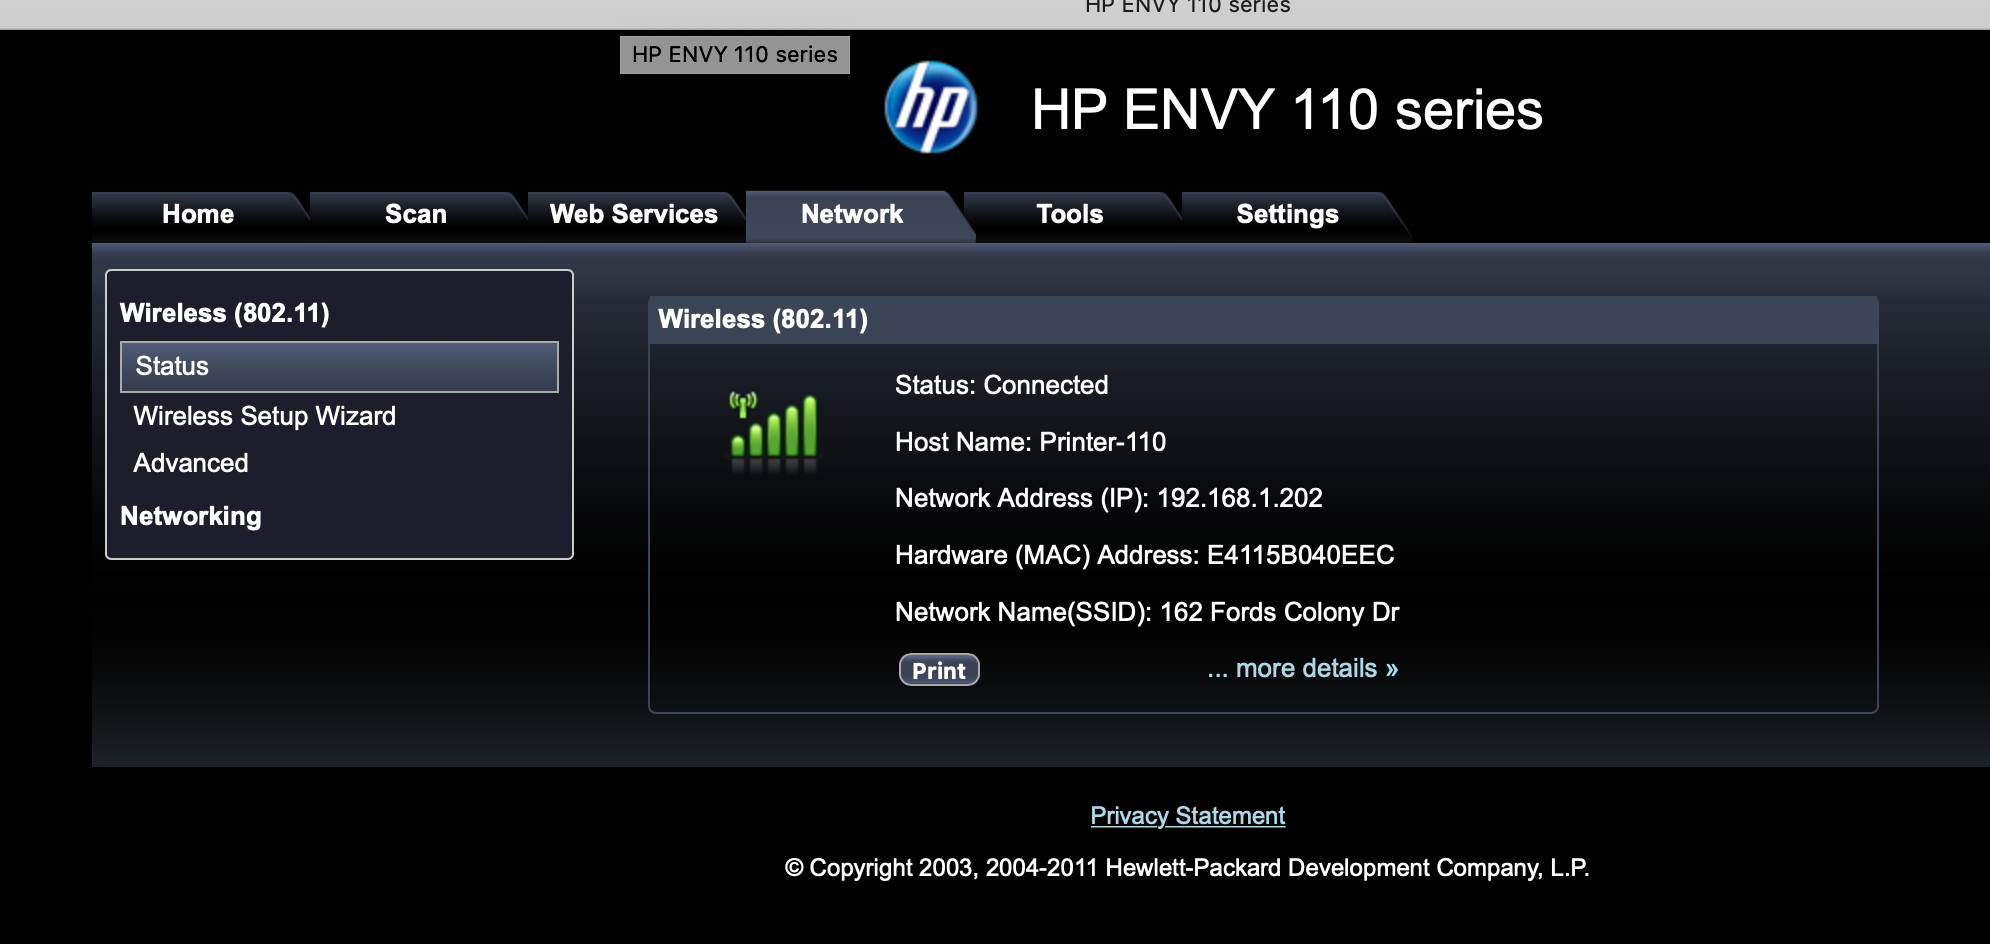 Stejl Traktor cigar HP Envy 110: I tried to change network device name my print ... - HP  Support Community - 7104518